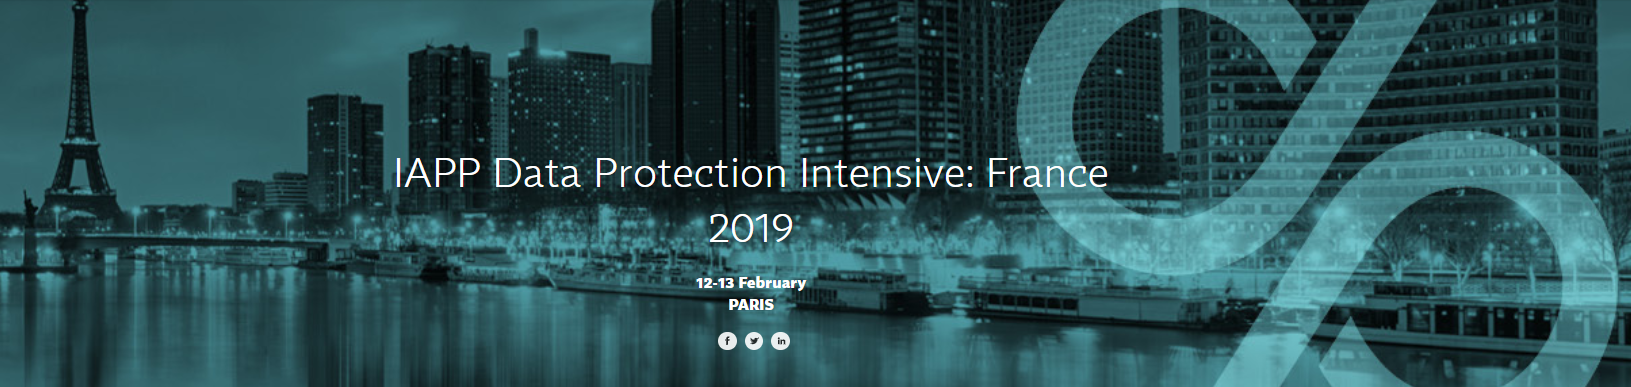 Data Protection Intensive France